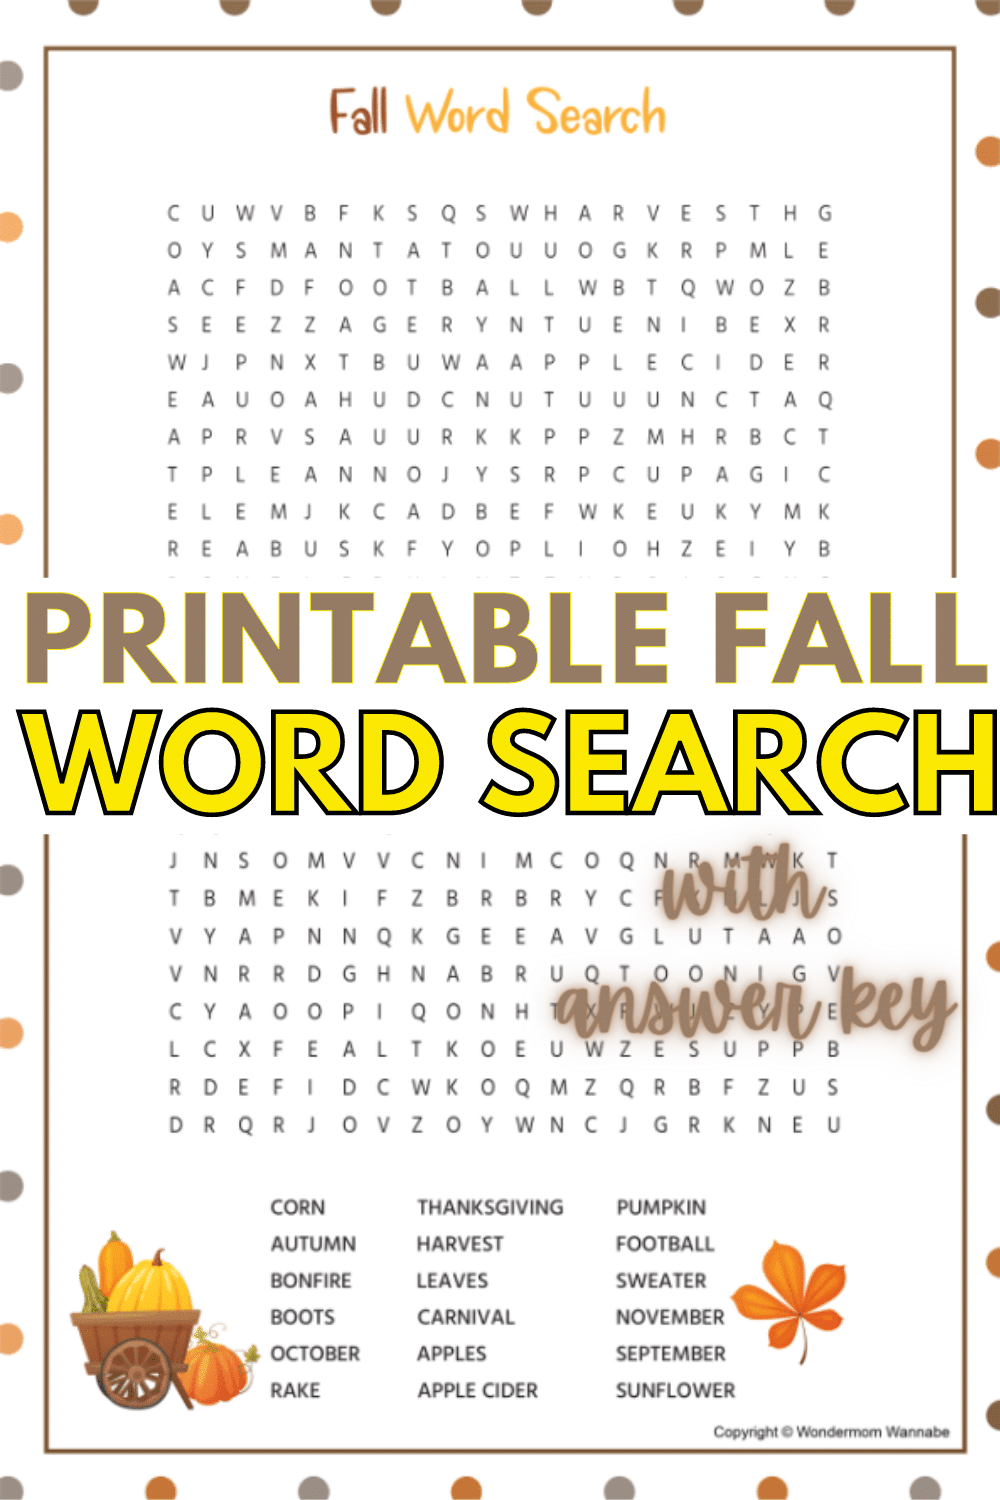 This free printable fall word search is a great autumn themed activity for elementary school aged kids! #wordsearch #printable #forkids #wondermomwannabe via @wondermomwannab